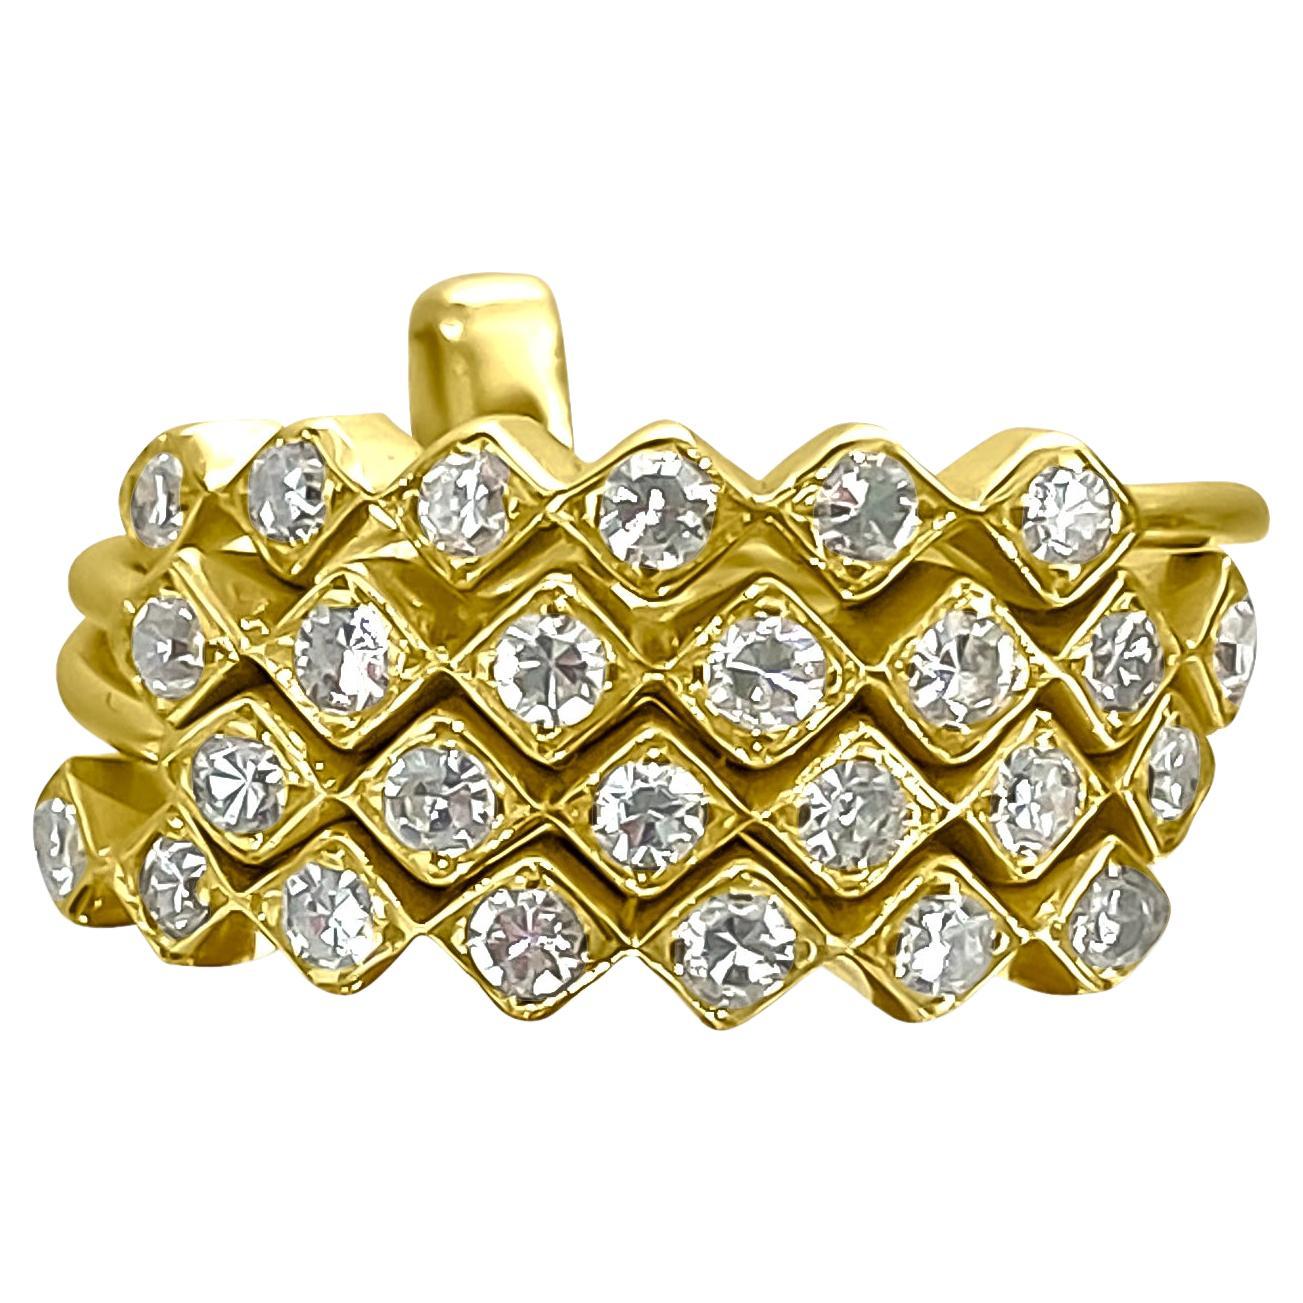 Vintage 1.00 Carat Diamond Stackable Ring in 14k Gold For Sale